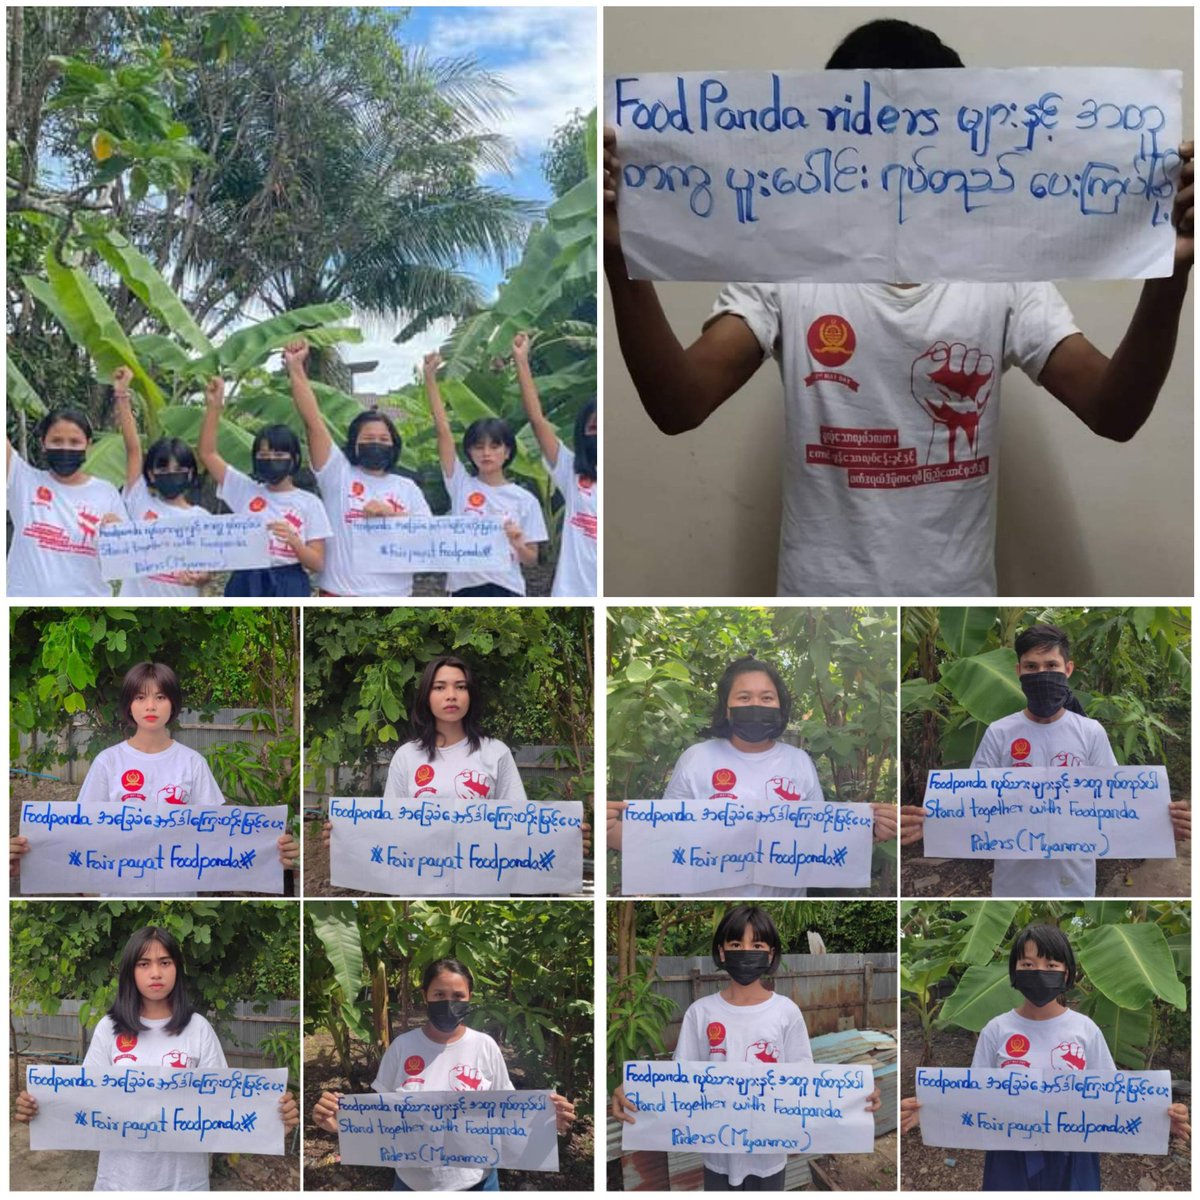 '#FairPayAtFoodPanda”
“Stand together With Food Panda Riders”

Federation of General Workers #Myanmar - FGWM staged a photo campaign today to show their solidarity with Food Panda Riders who's been on strike due to labor rights violations.
#2022June11Coup
#WhatsHappeninglnMyanmar